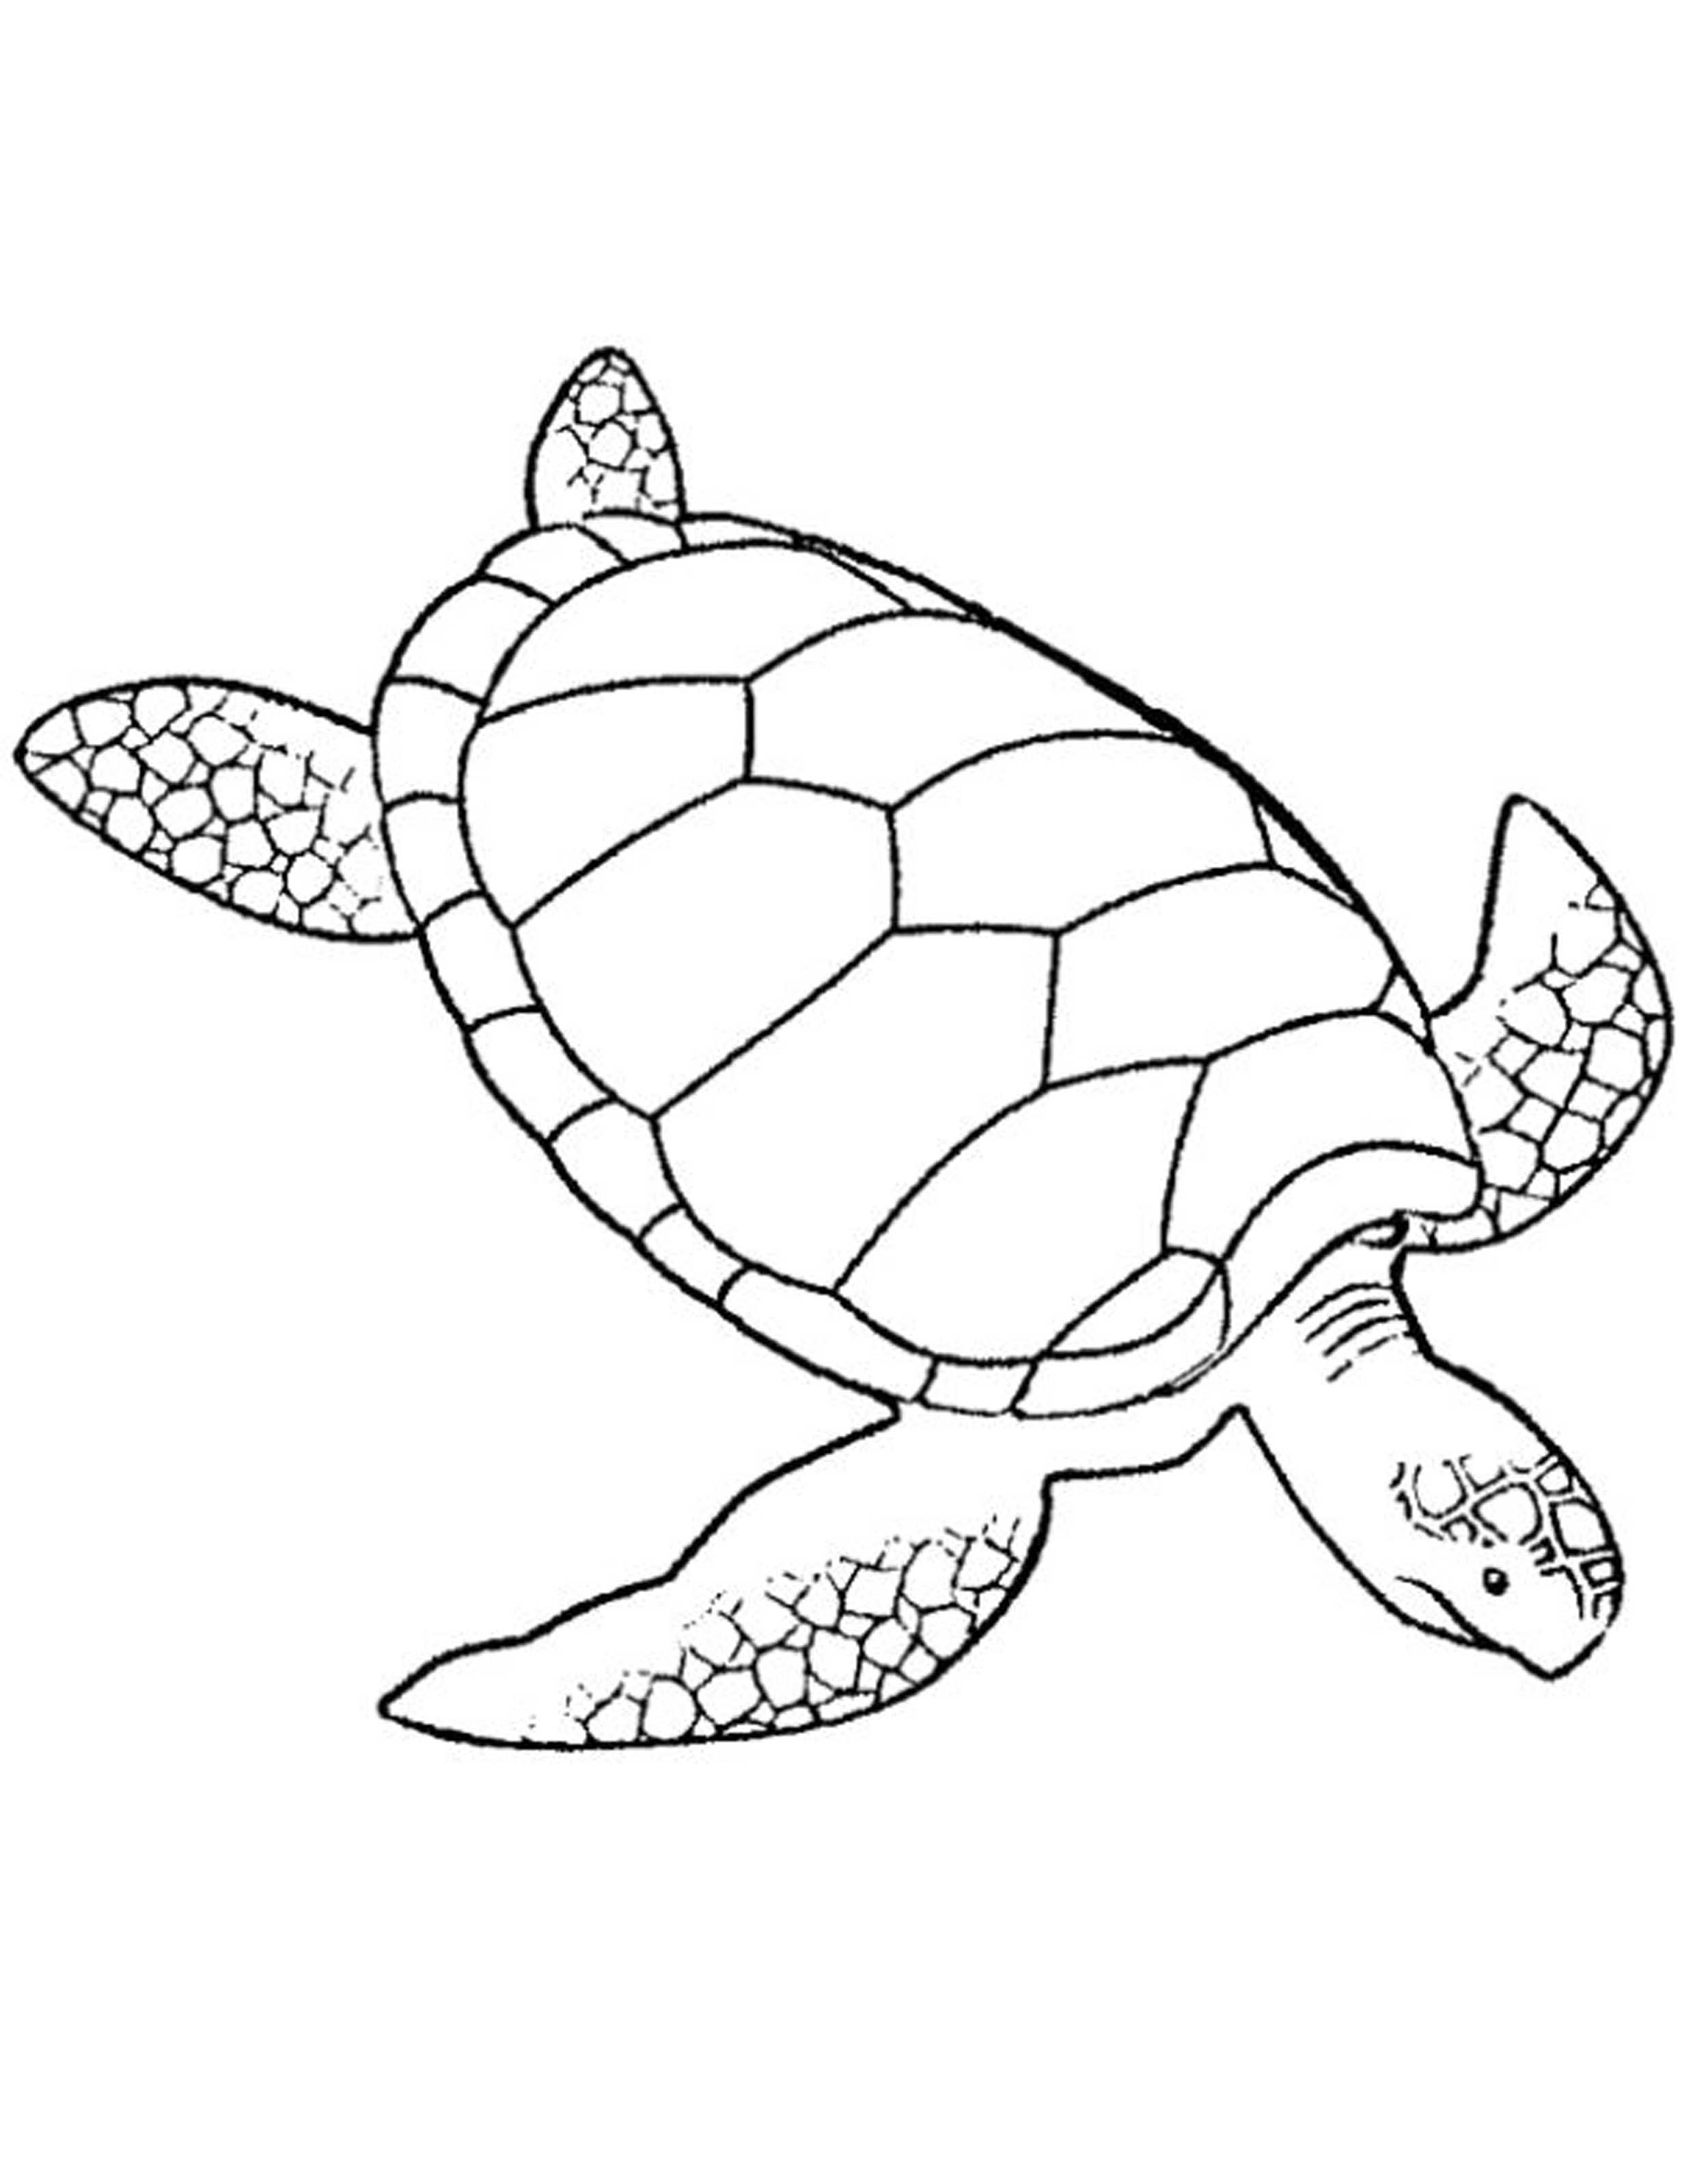 Print & Download   Turtle Coloring Pages as the Educational Tool